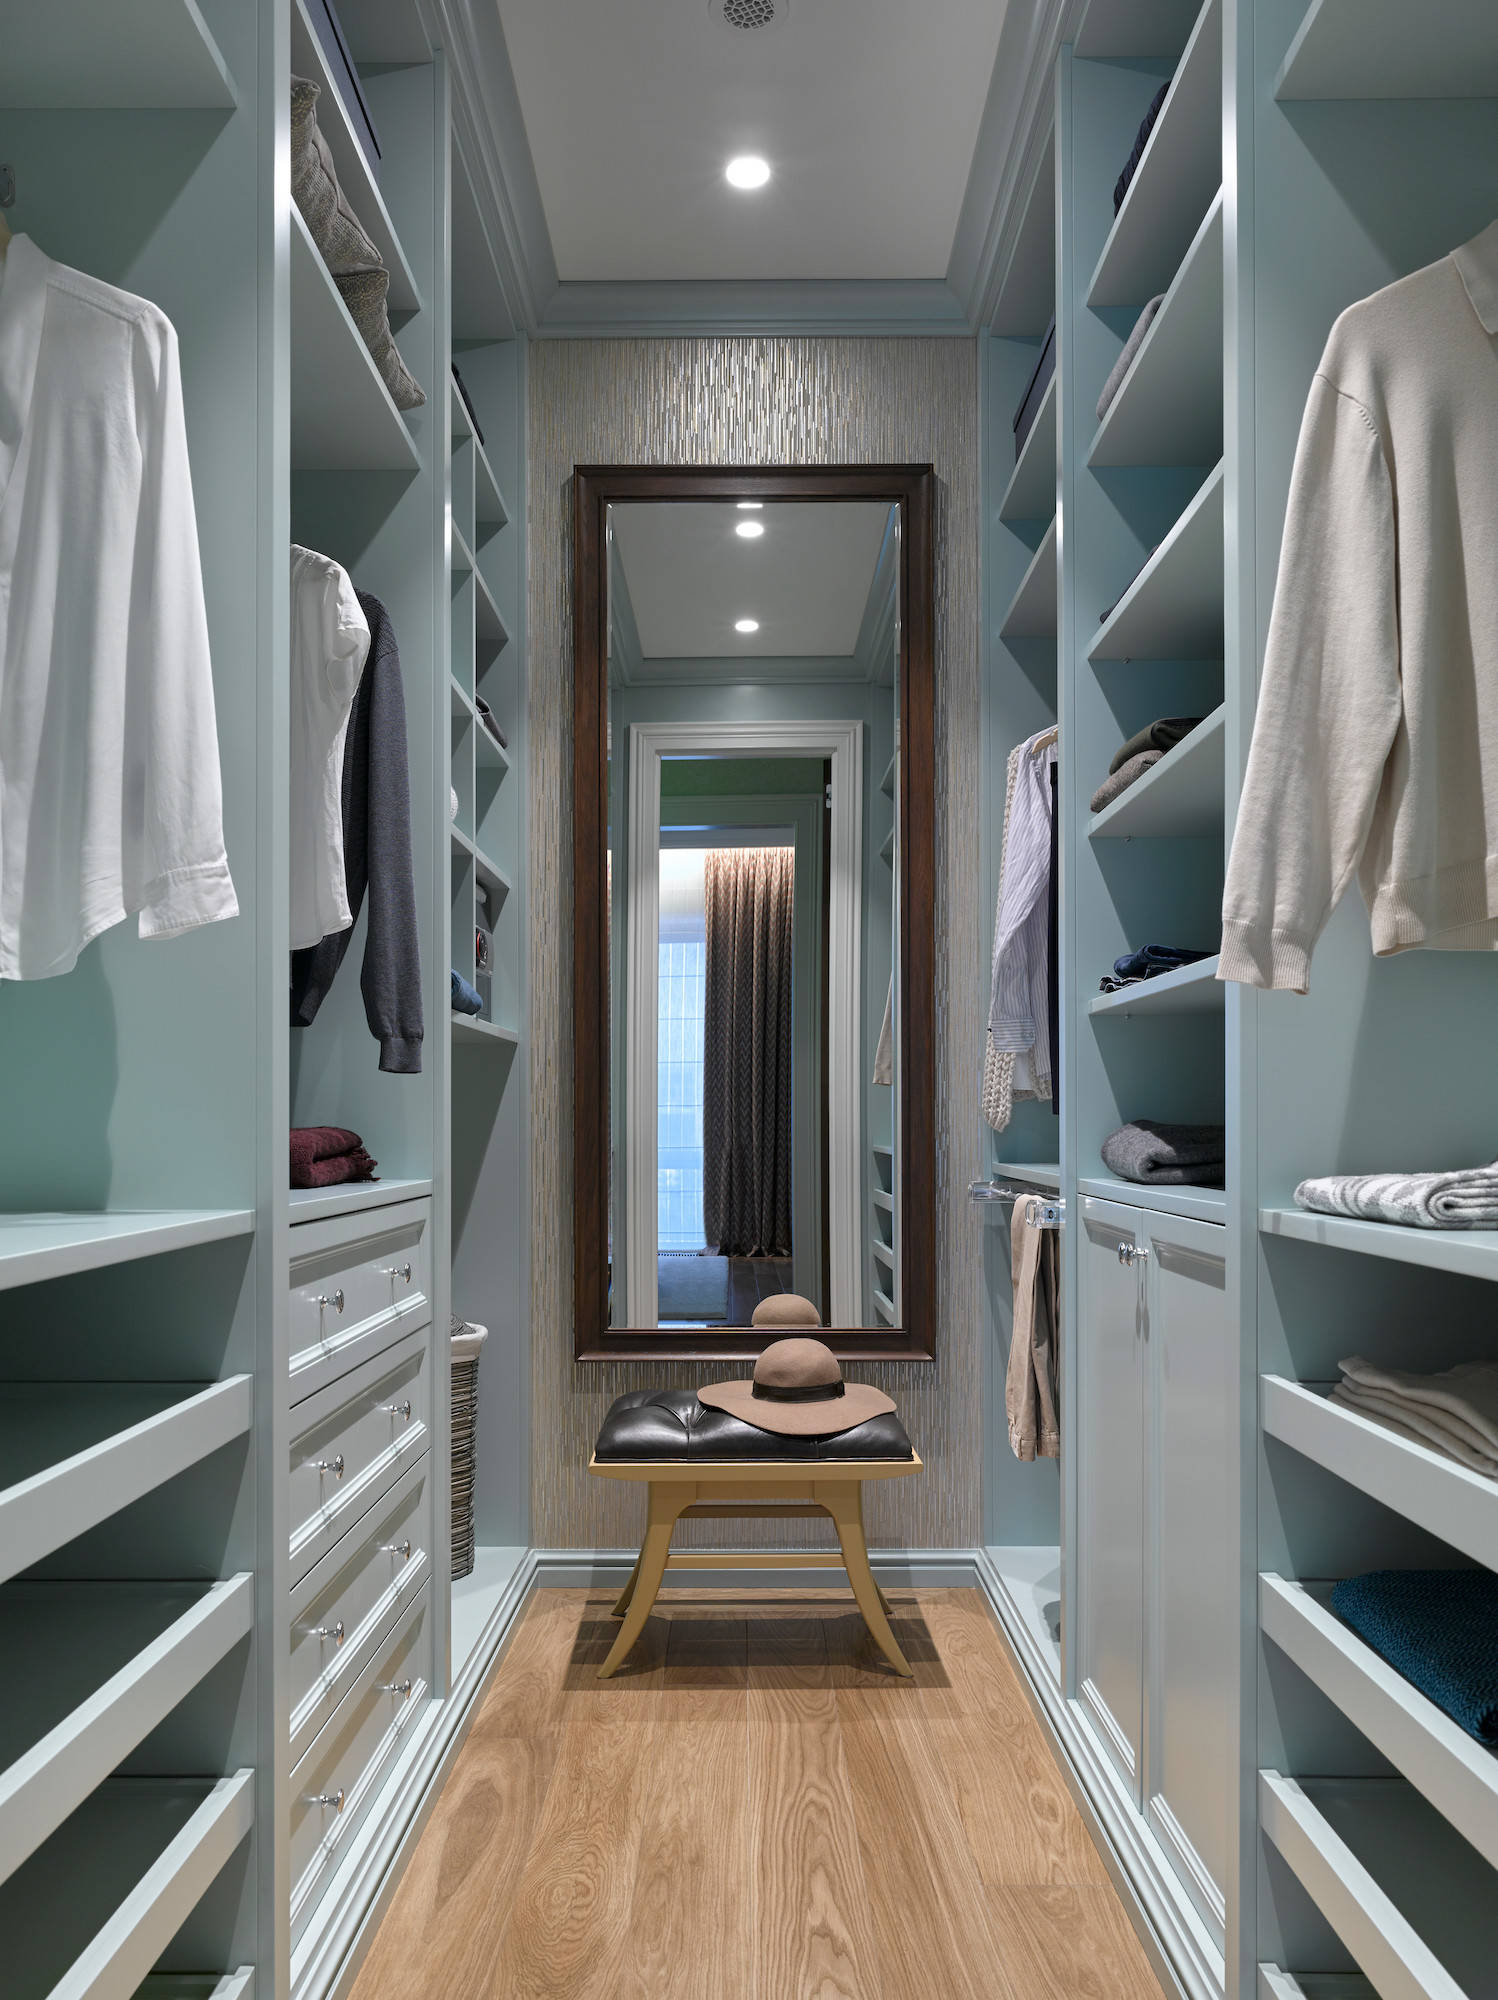 75 Beautiful Small Closet Pictures Ideas April 2021 Houzz